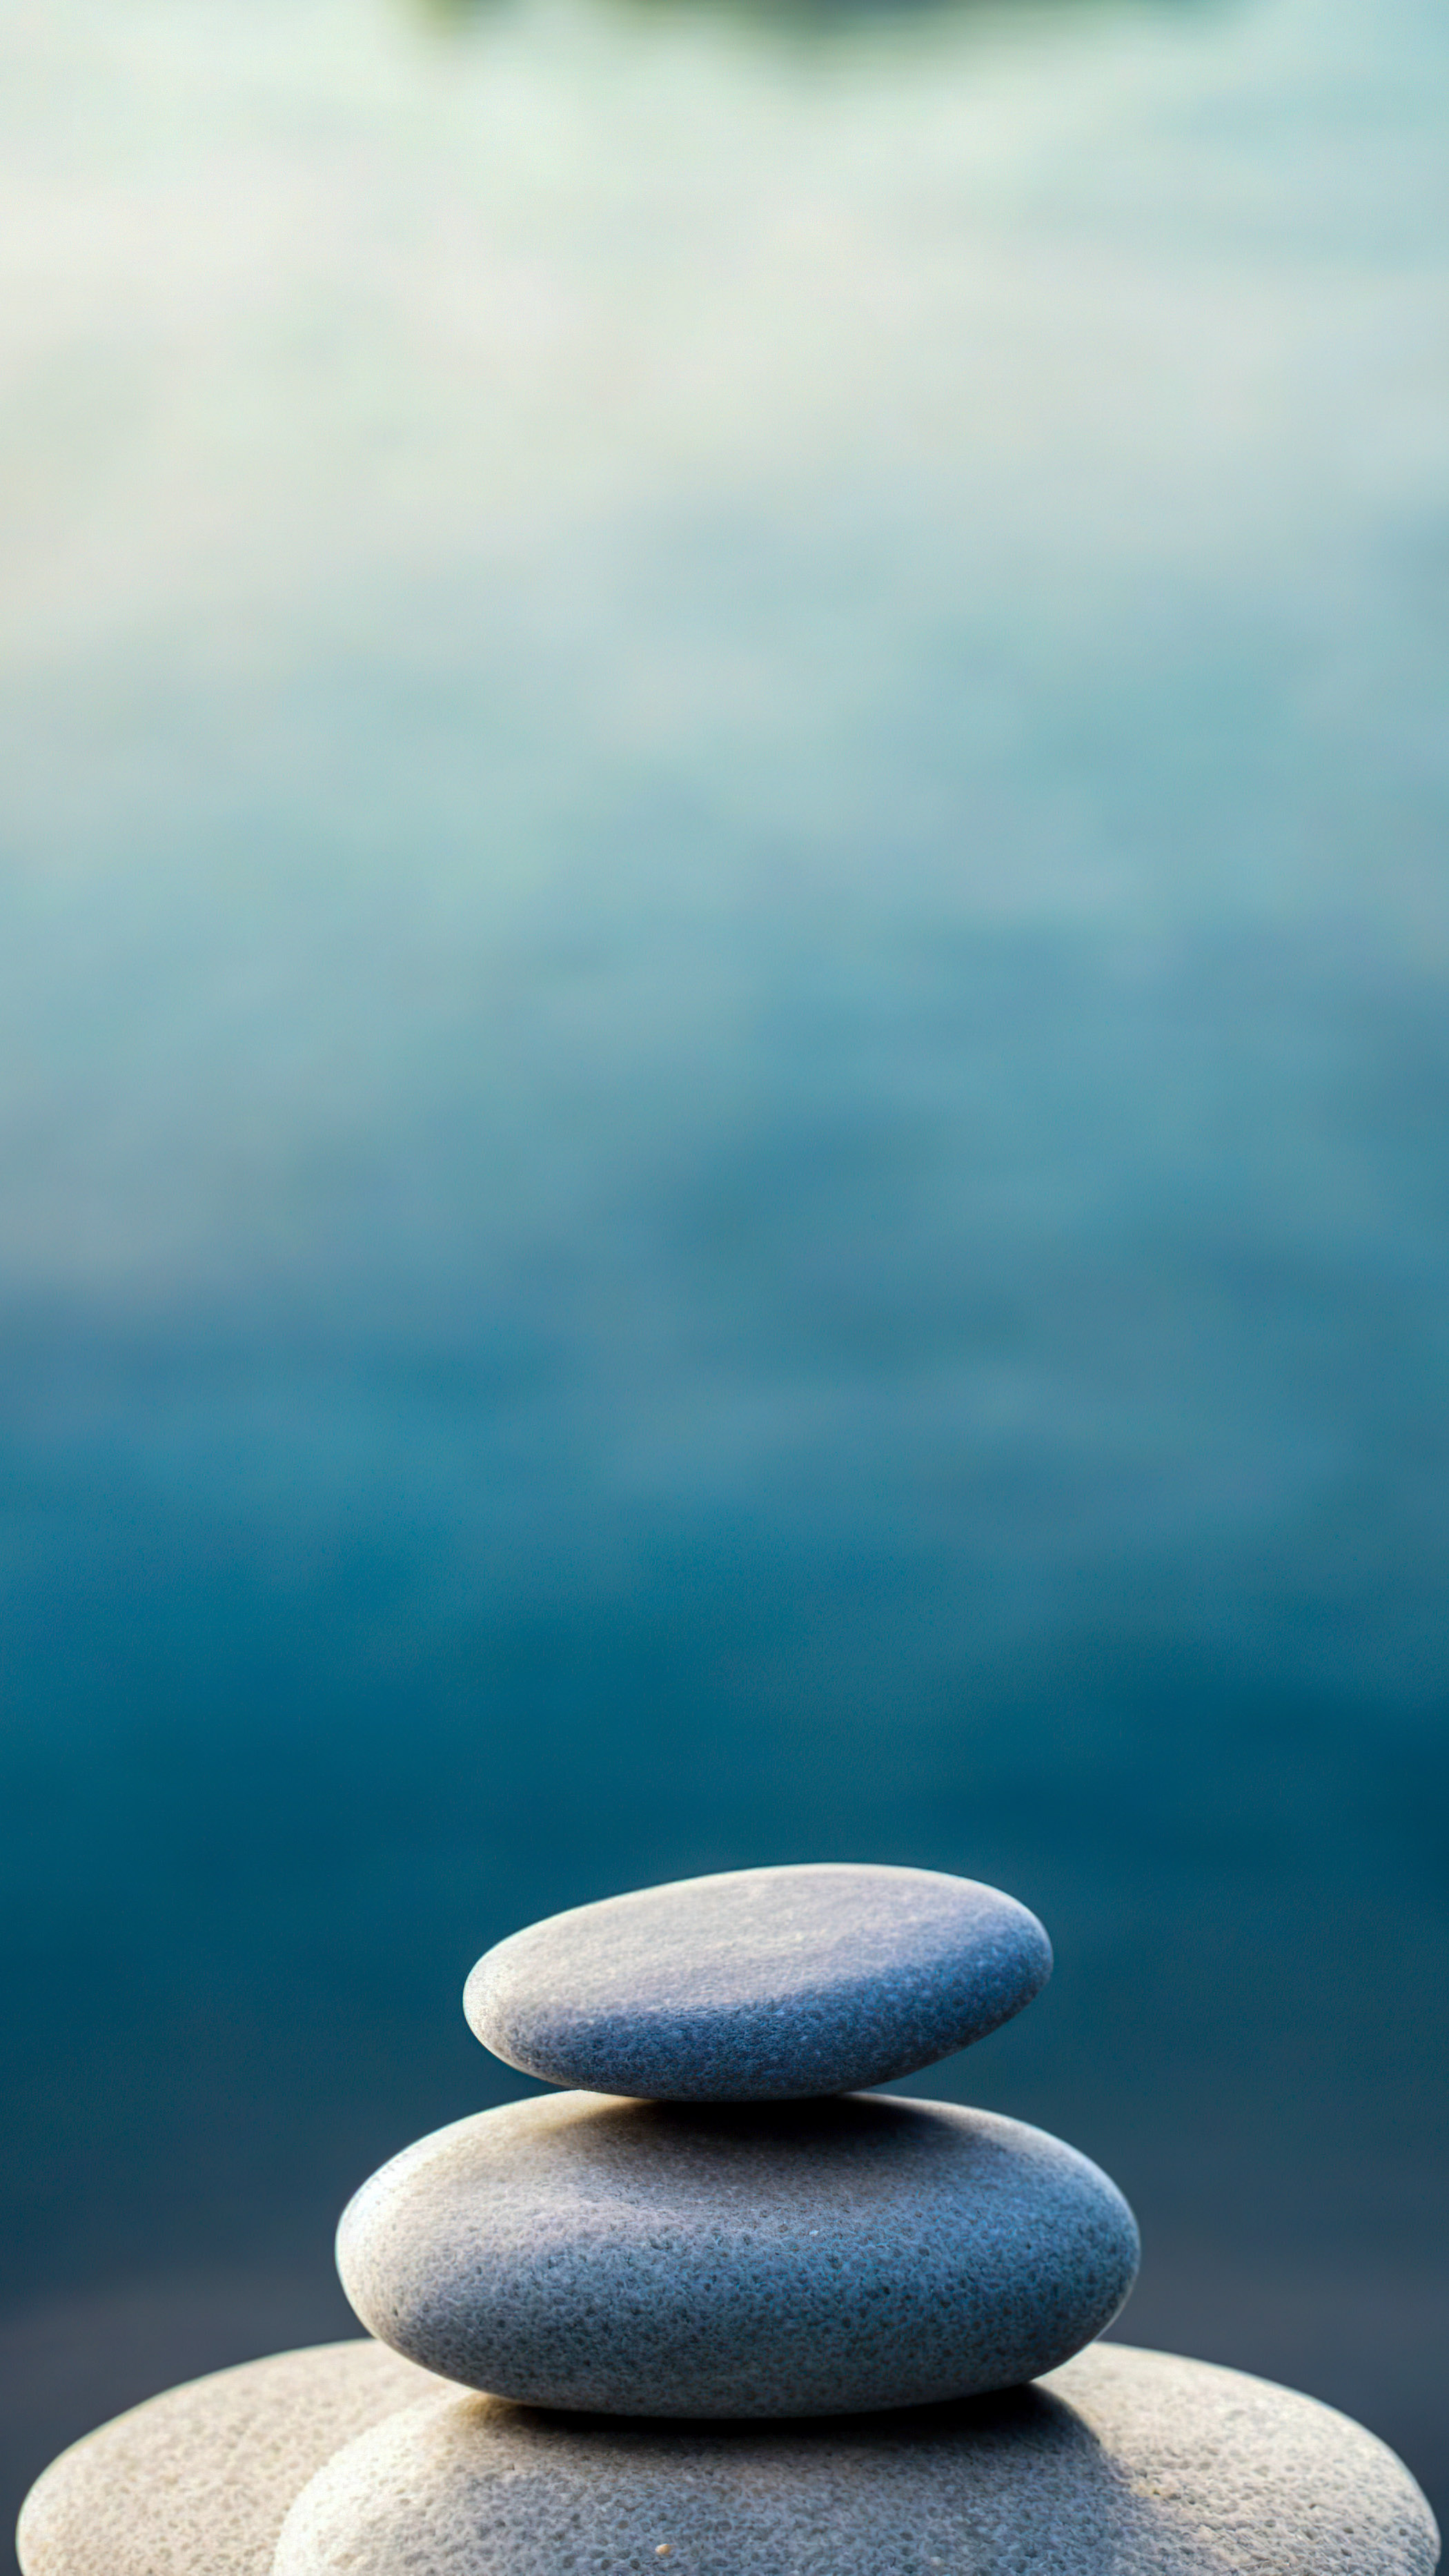 Experience minimalism at its best with our cool HD iPhone wallpaper, a minimalist design featuring Zen stones stacked against a serene water backdrop.